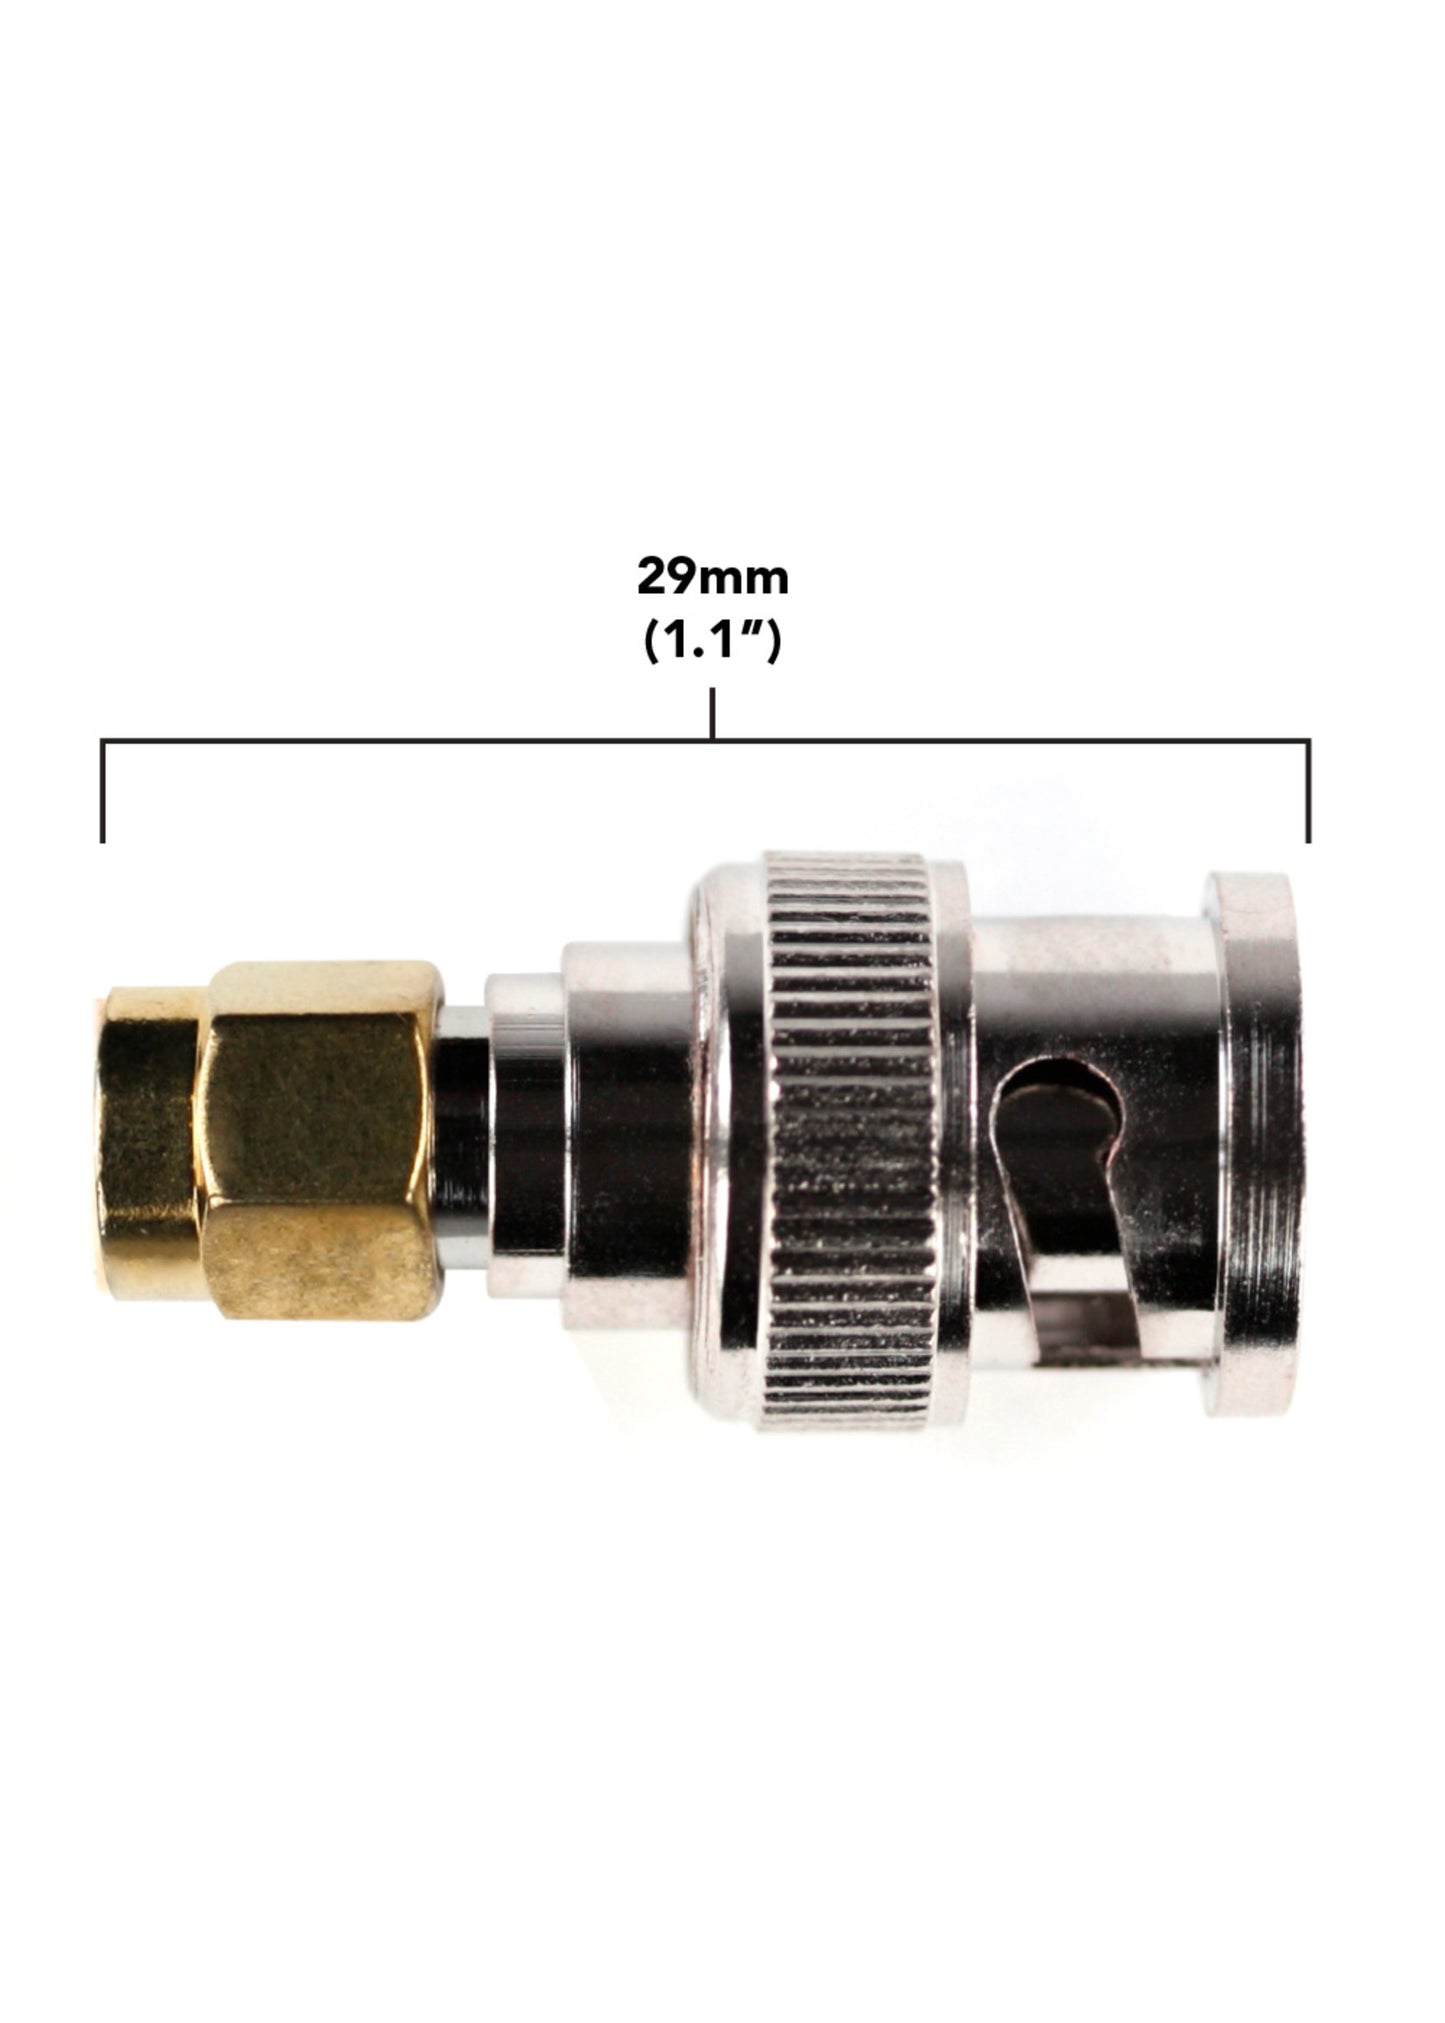 Male BNC to Male SMA Connectors (5 pack)